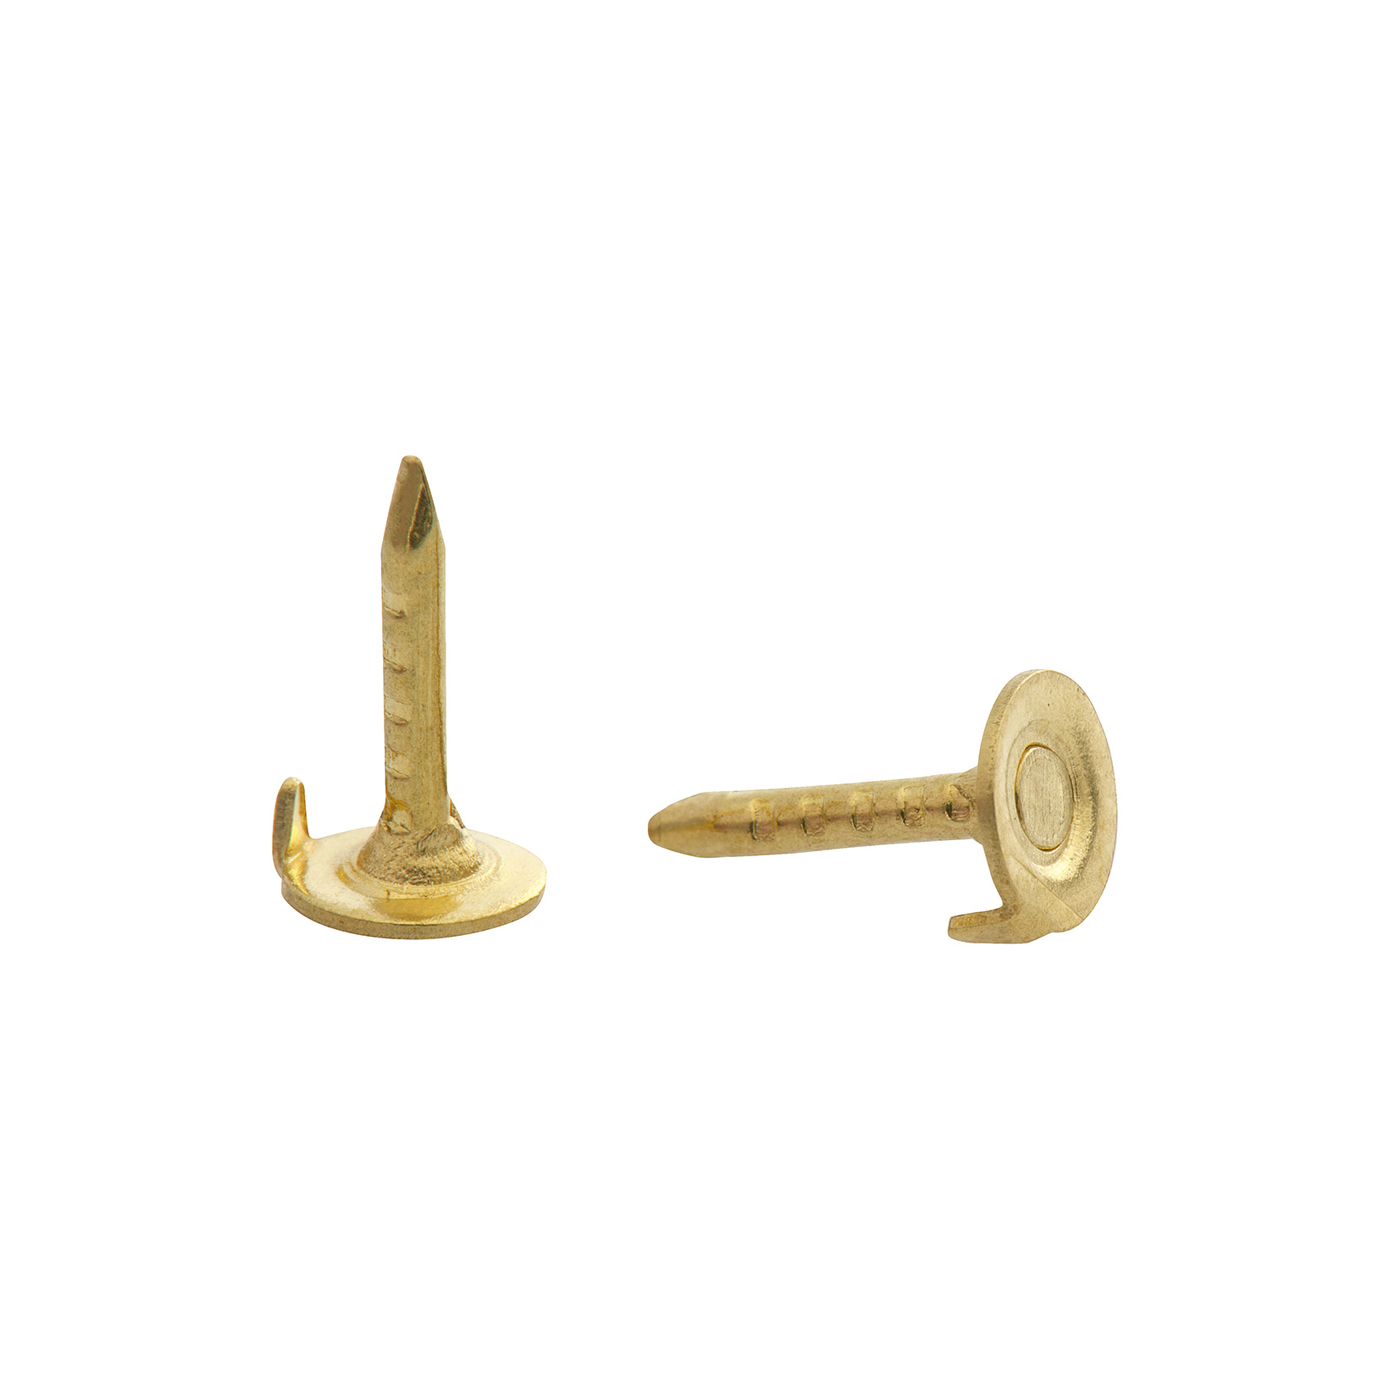 Pins for Security Clamp, 8 mm - 10 pieces